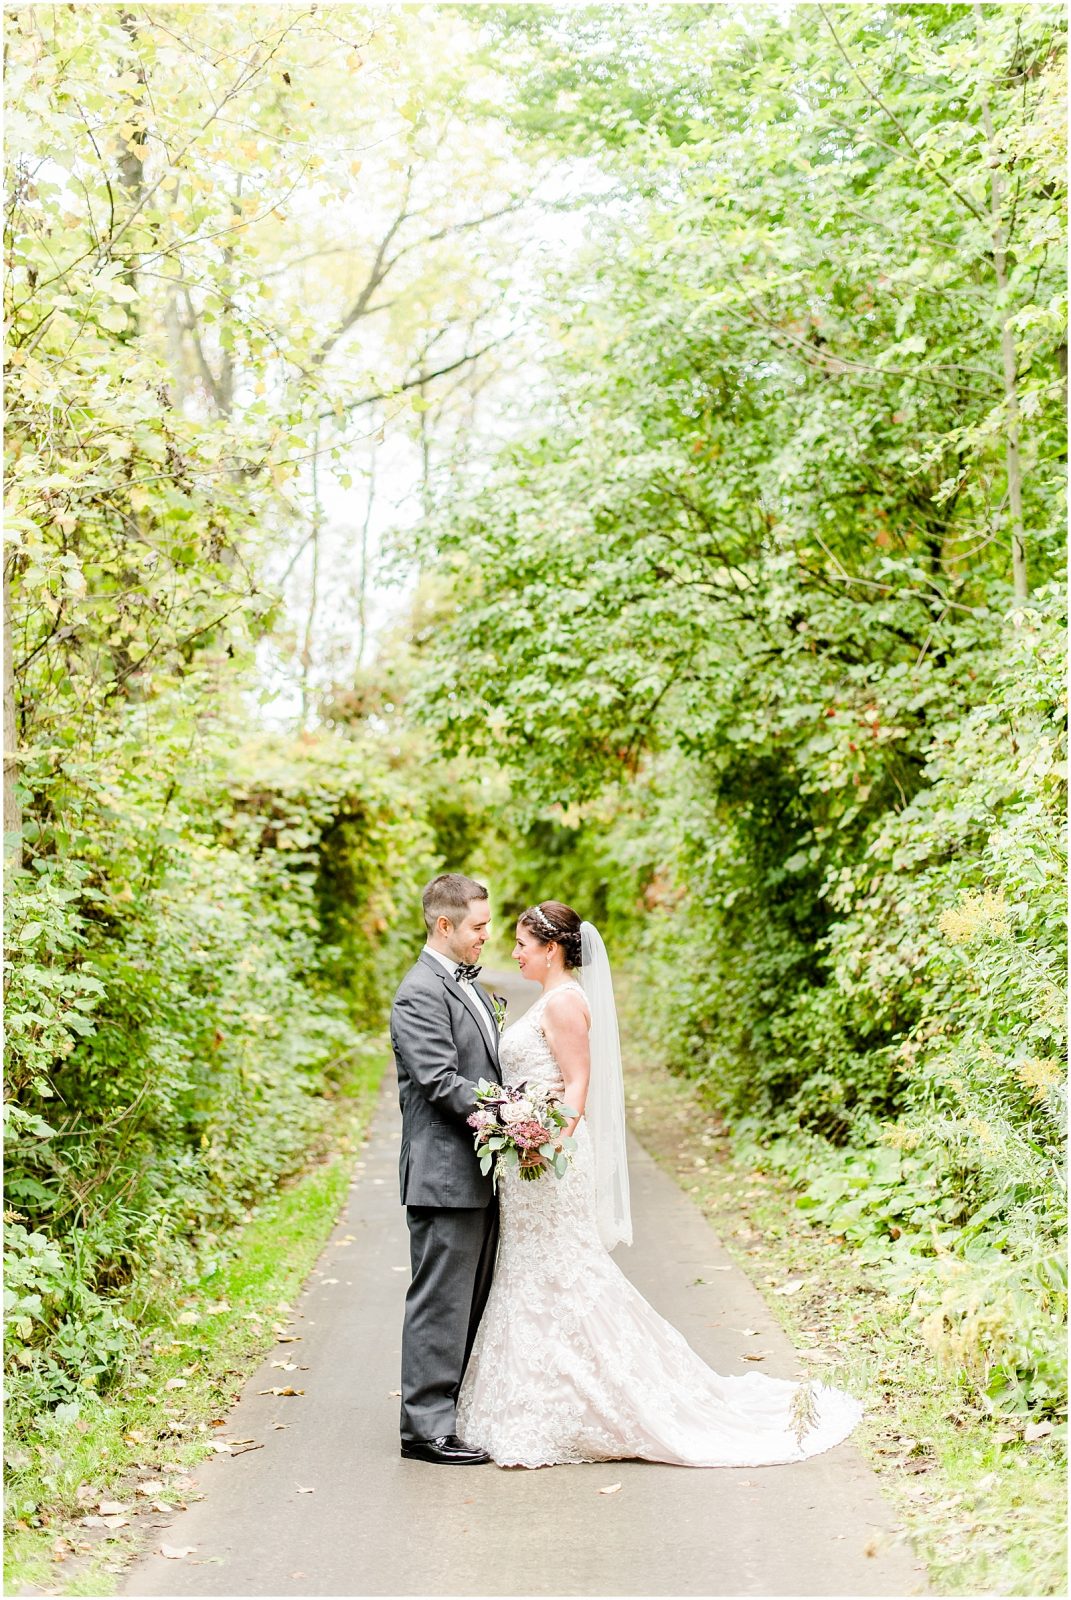 firerock golf course wedding bride and groom on path in middle of trees